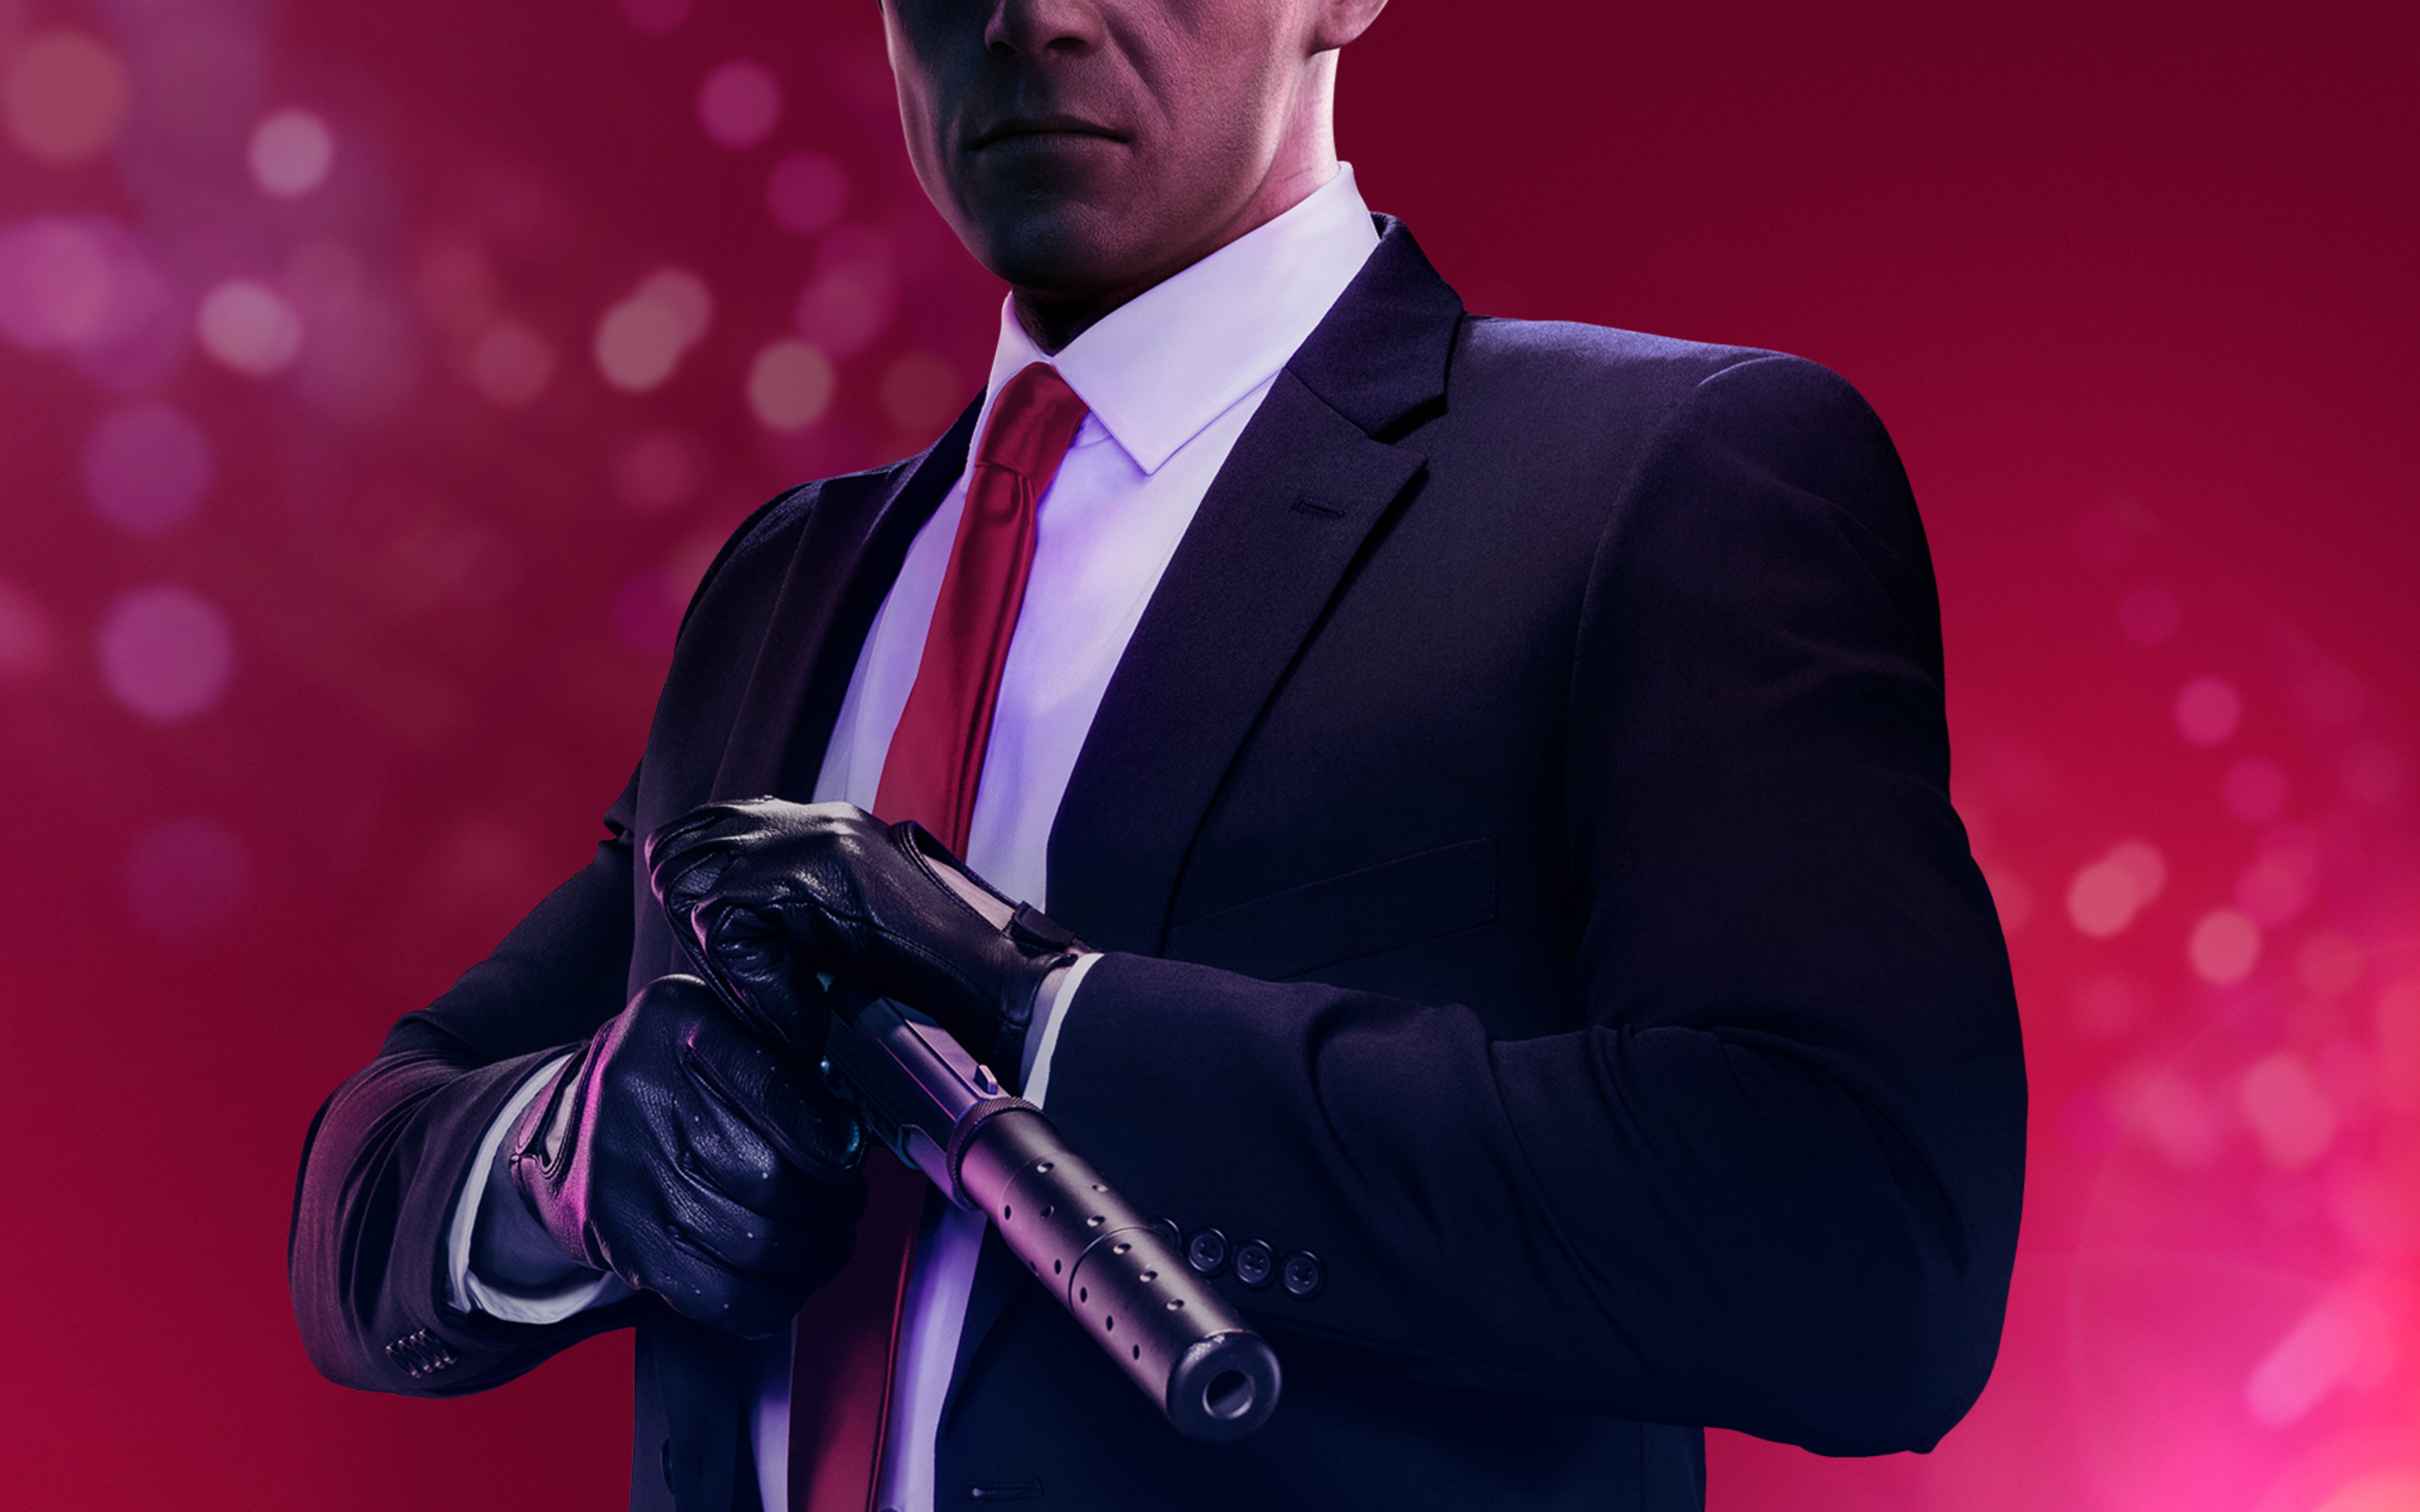 Agent 47 Hitman 2 Game Wallpaper In 3840x2400 Resolution